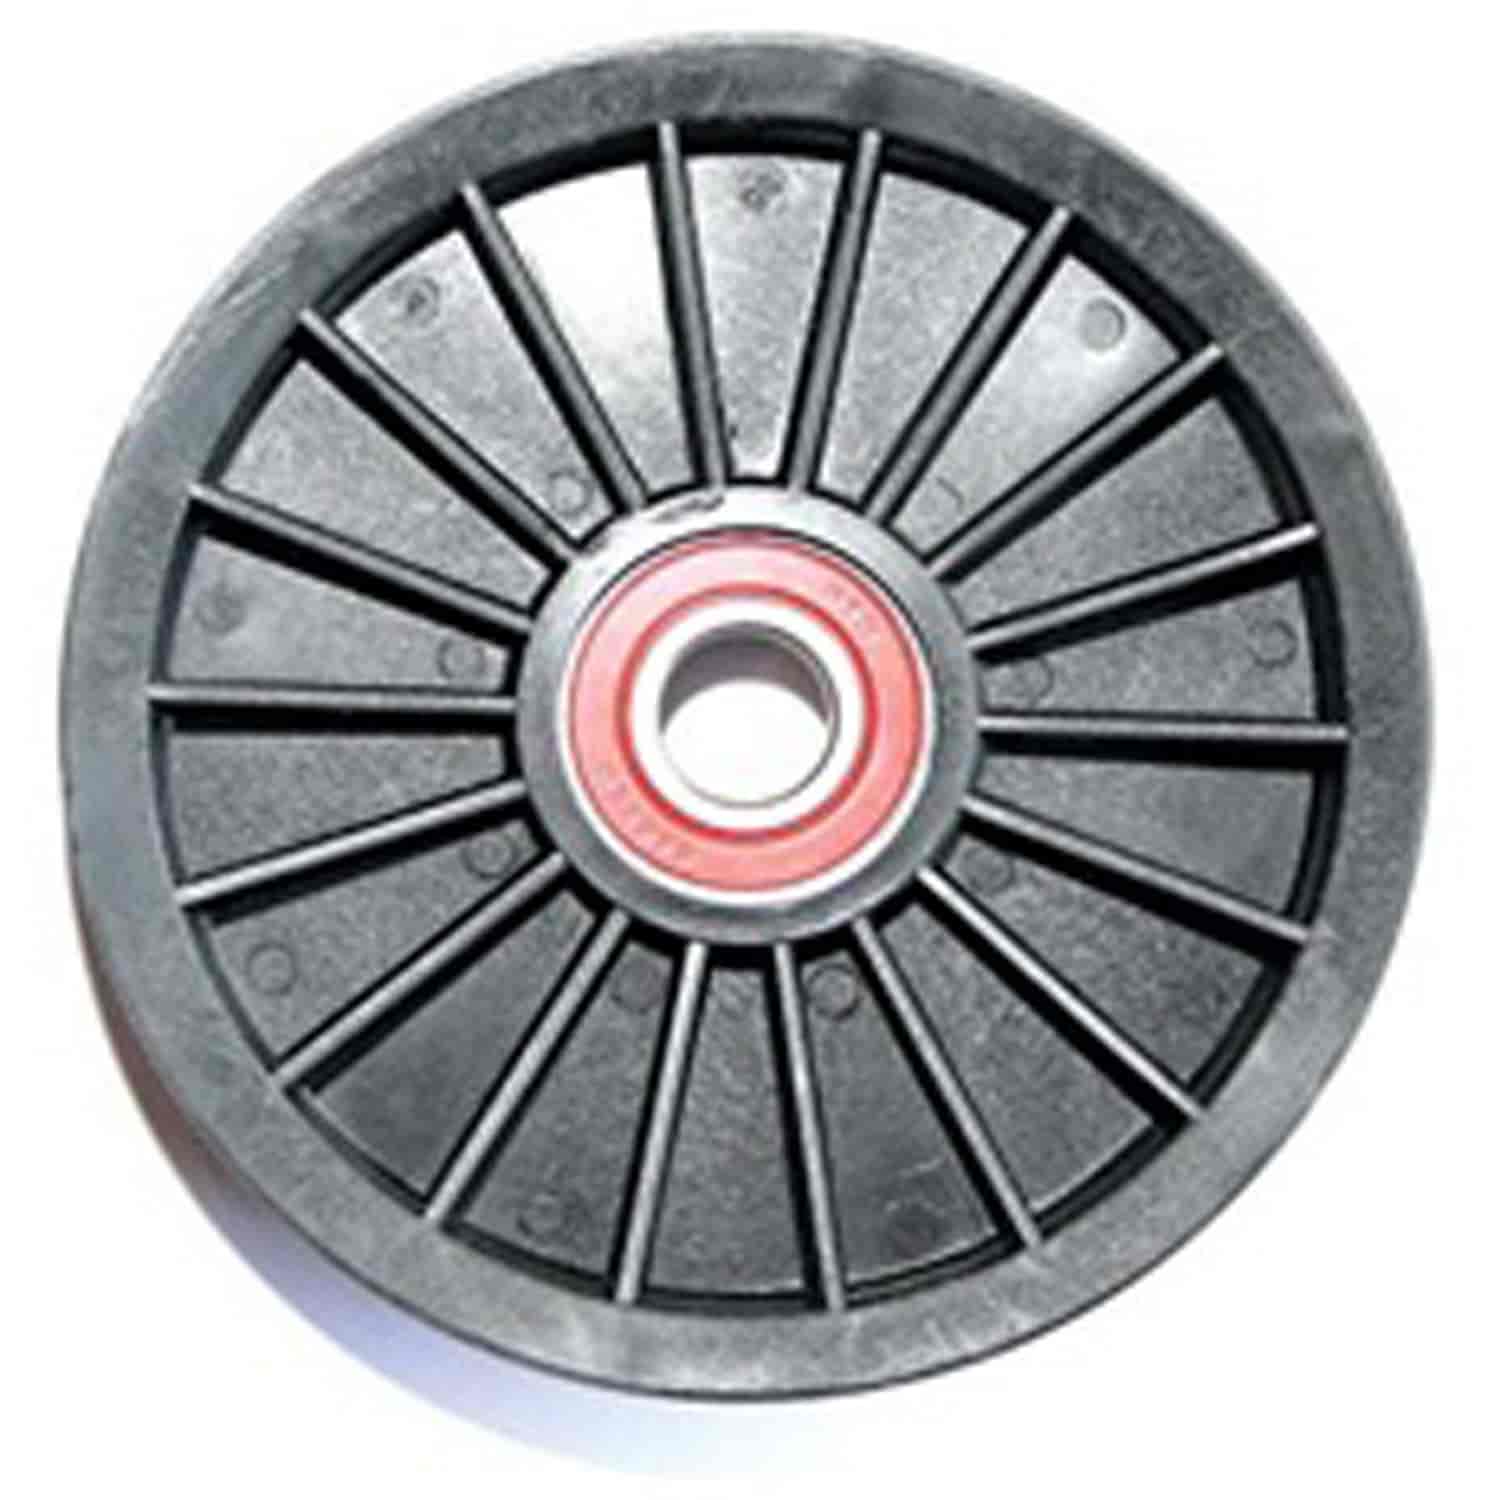 This idler pulley from Omix-ADA fits the 2.4L engine in 02-05 Jeep Libertys without air conditioning.